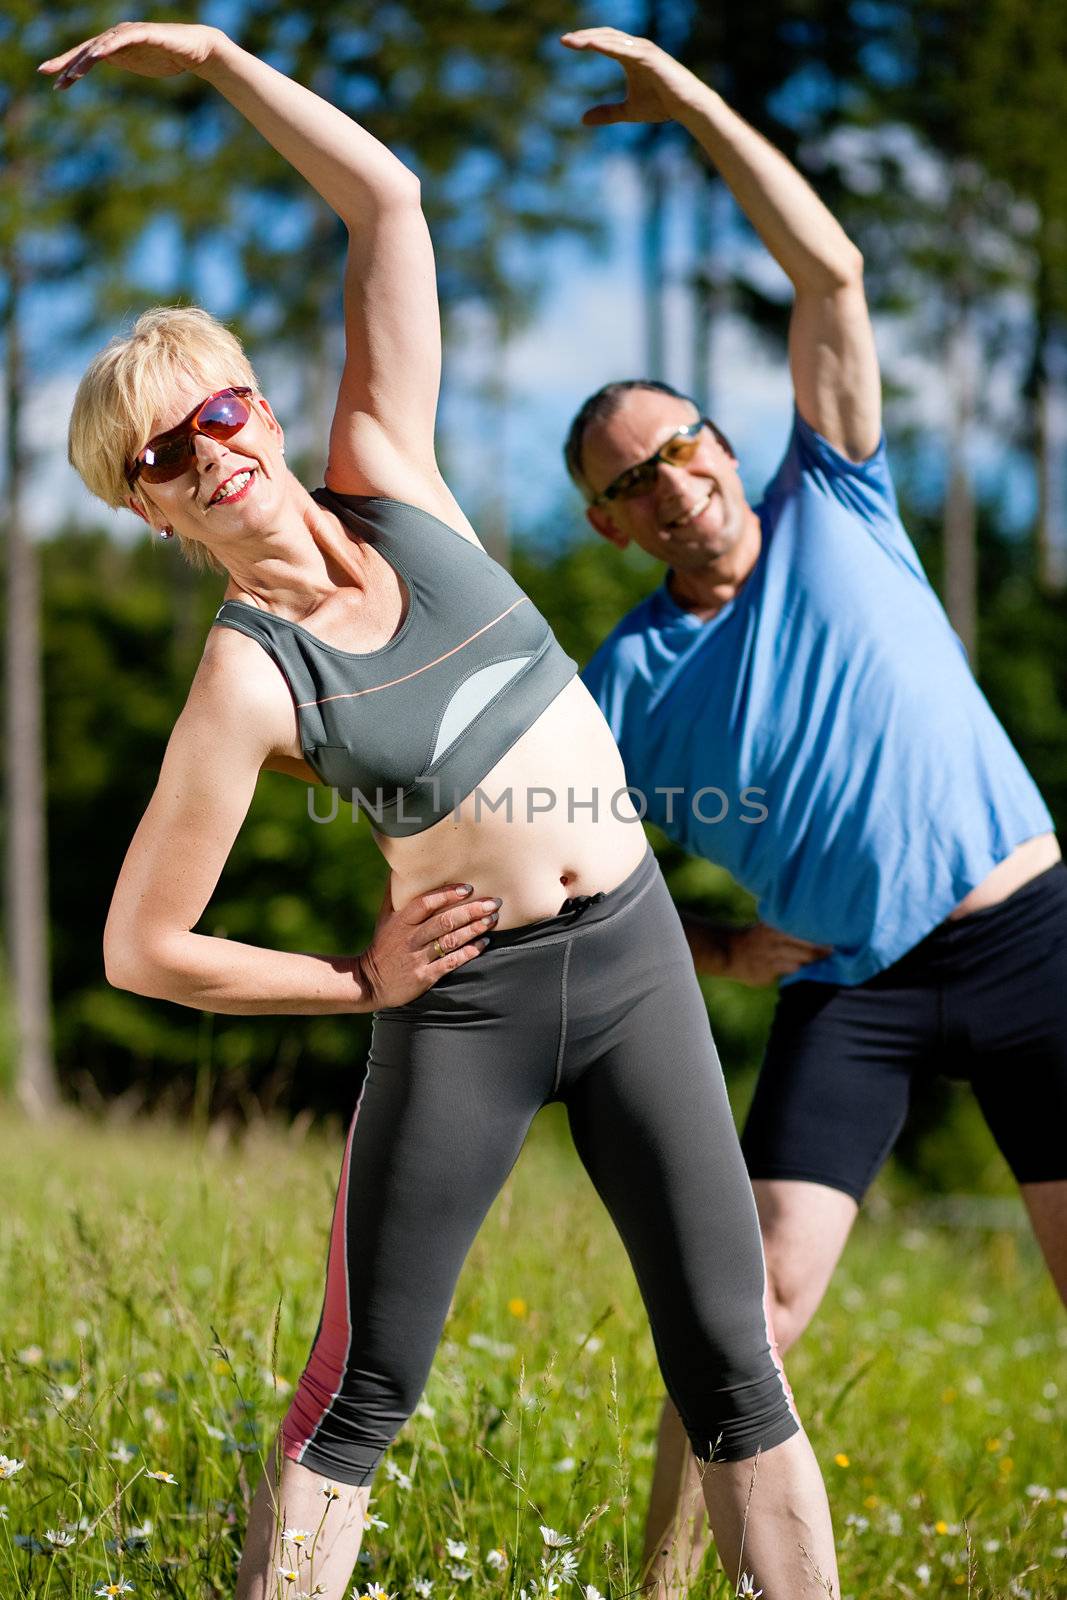 Mature or senior couple in jogging gear doing sport and physical exercise outdoors, stretching and gymnastics